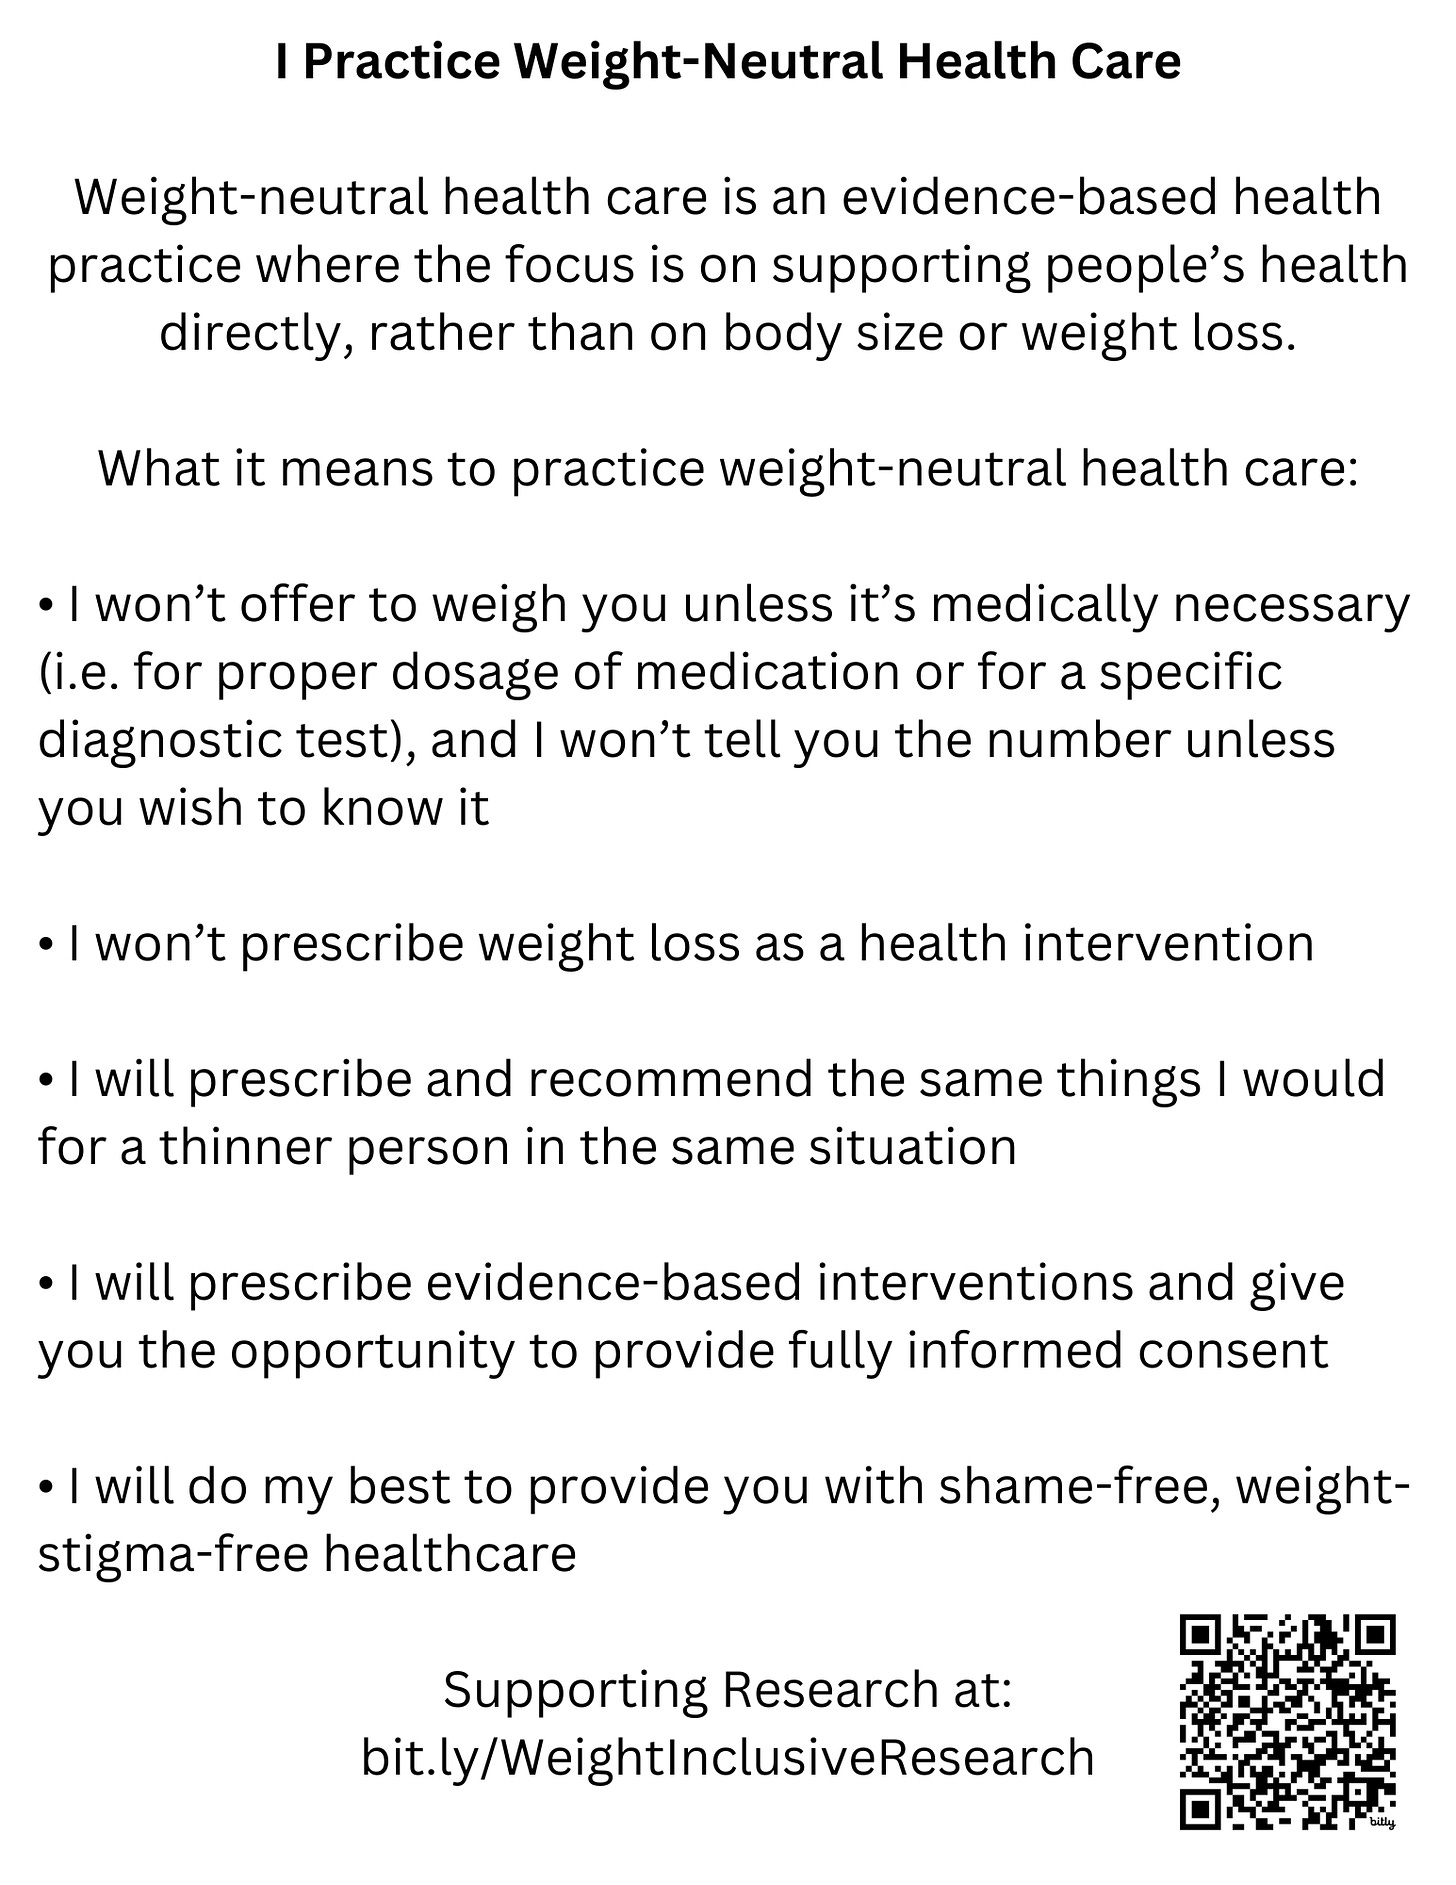 I Practice Weight-Neutral Health Care  Weight-neutral health care is an evidence-based health practice where the focus is on supporting people’s health directly, rather than on body size or weight loss.  What it means to practice weight-neutral health care:  •	I won’t offer to weigh you unless it’s medically necessary (i.e. for proper dosage of medication or for a specific diagnostic test), and I won’t tell you the number unless you wish to know it •	I won’t prescribe weight loss as a health intervention •	I will prescribe and recommend the same things I would for a thinner person in the same situation •	I will prescribe evidence-based interventions and give you the opportunity to provide fully informed consent •	I will do my best to provide you with shame-free, weight-stigma-free healthcare   Supporting Research at: Bit.ly/WeightInclusiveResearch